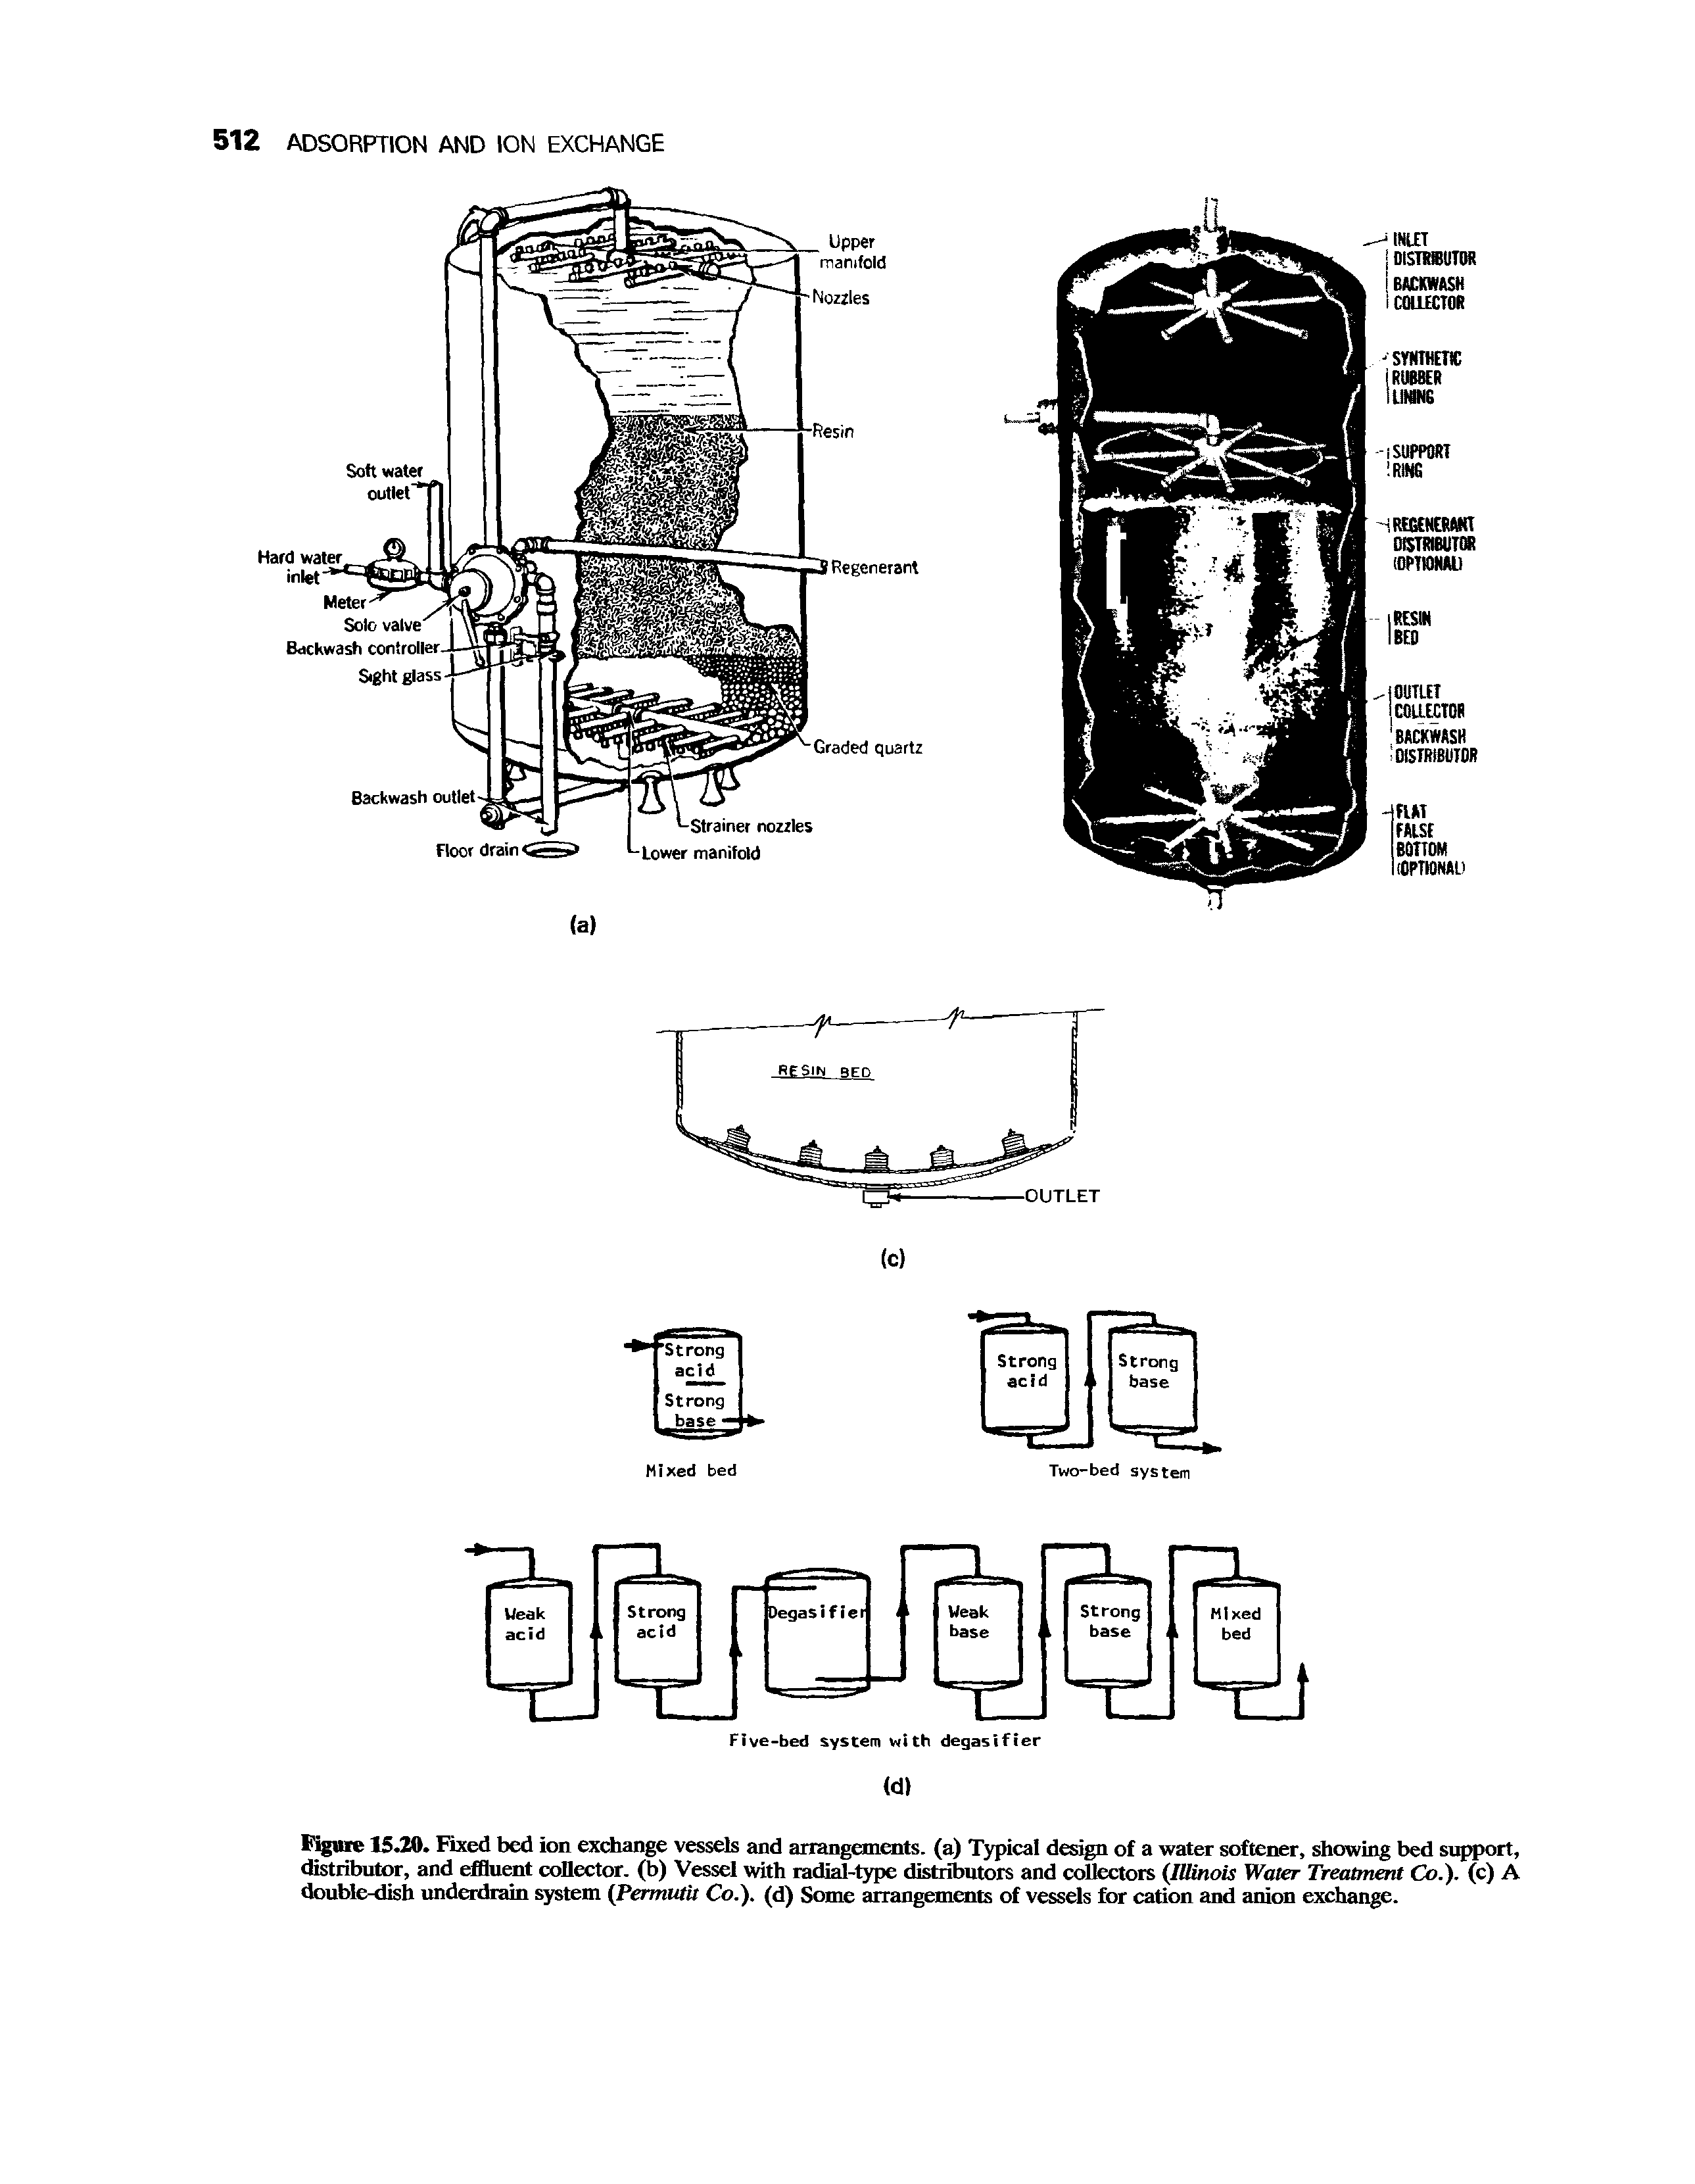 Figure 15.20. Fixed bed ion exchange vessels and arrangements, (a) Typical design of a water softener, showing bed support, distributor, and effluent collector, (b) Vessel with radial-type distributors and collectors (Illinois Water Treatment Co.), (c) A double-dish underdrain system (Permutit Co.), (d) Some arrangements of vessels for cation and anion exchange.